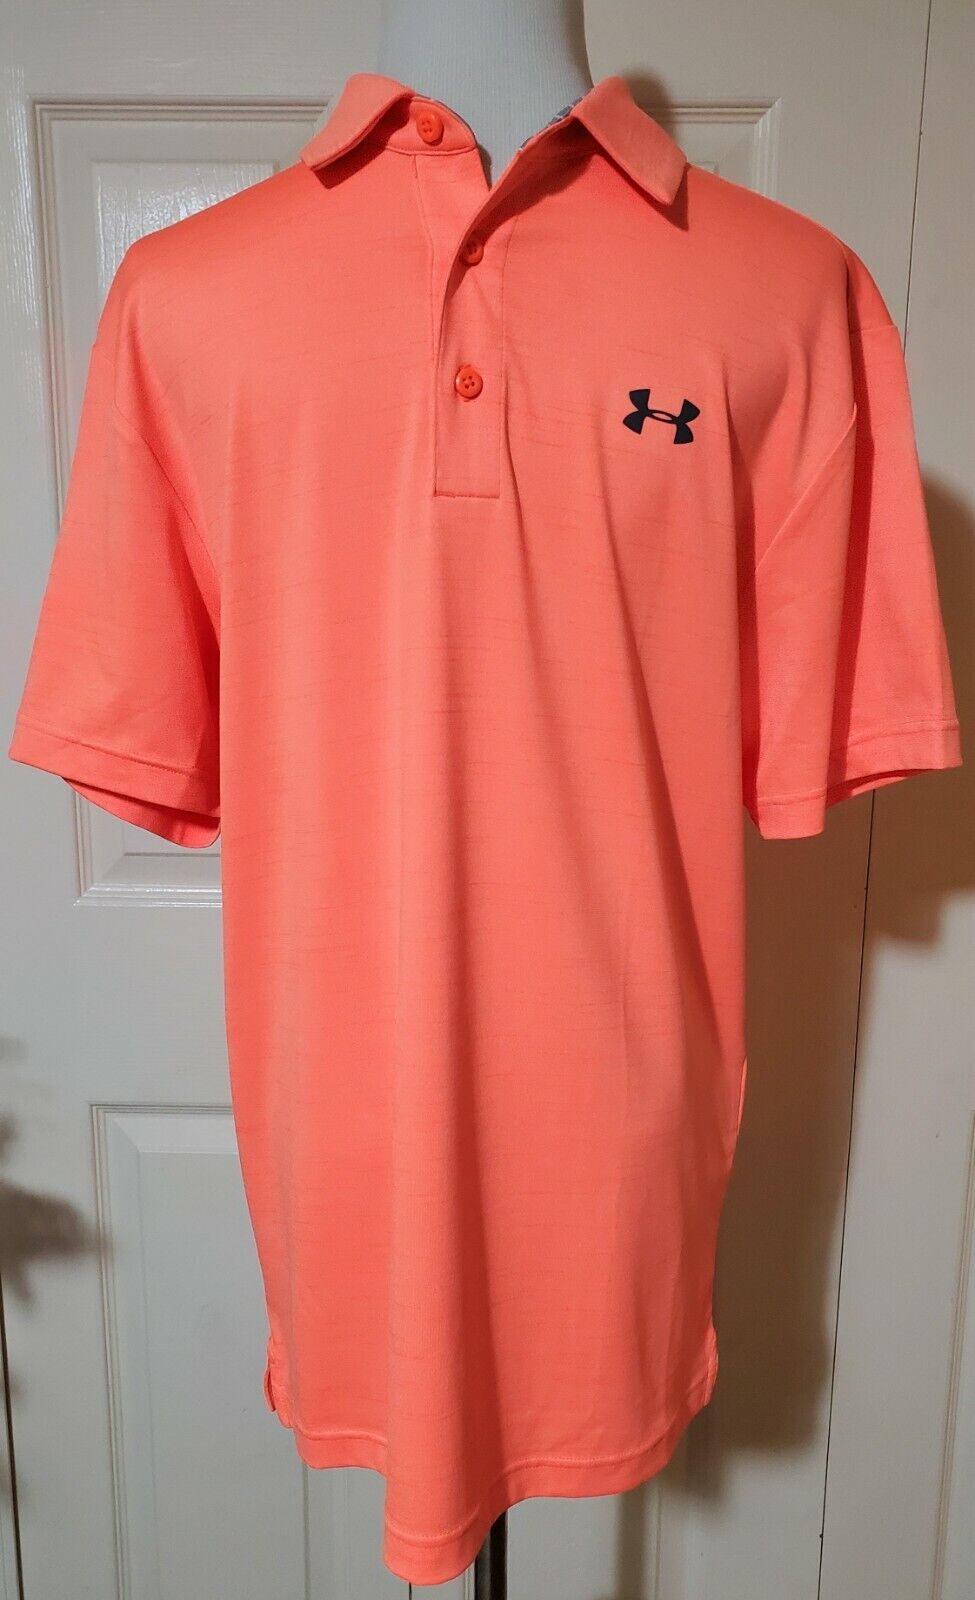 NEW Under Armour Mens Small Short Sleeve Solid Orange Athletic Polo Golf Shirt